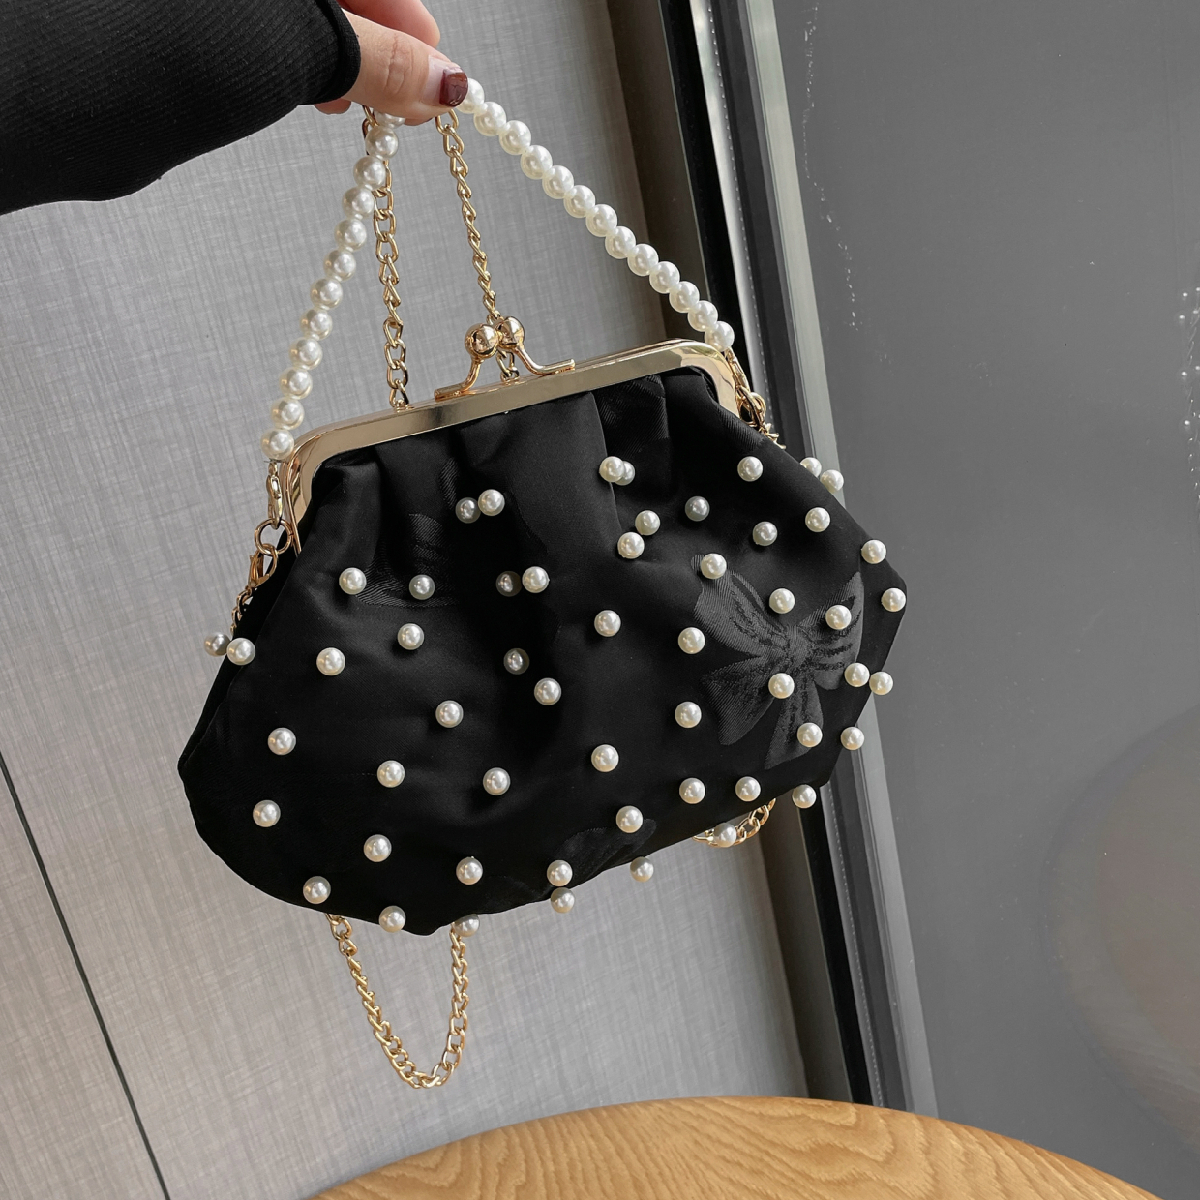 Qiayime Purse and Handbags for Women Fashion Tweed Pearl Top Handle Satchel Shoulder Tote Bead Chain Crossbody Clutch Bag